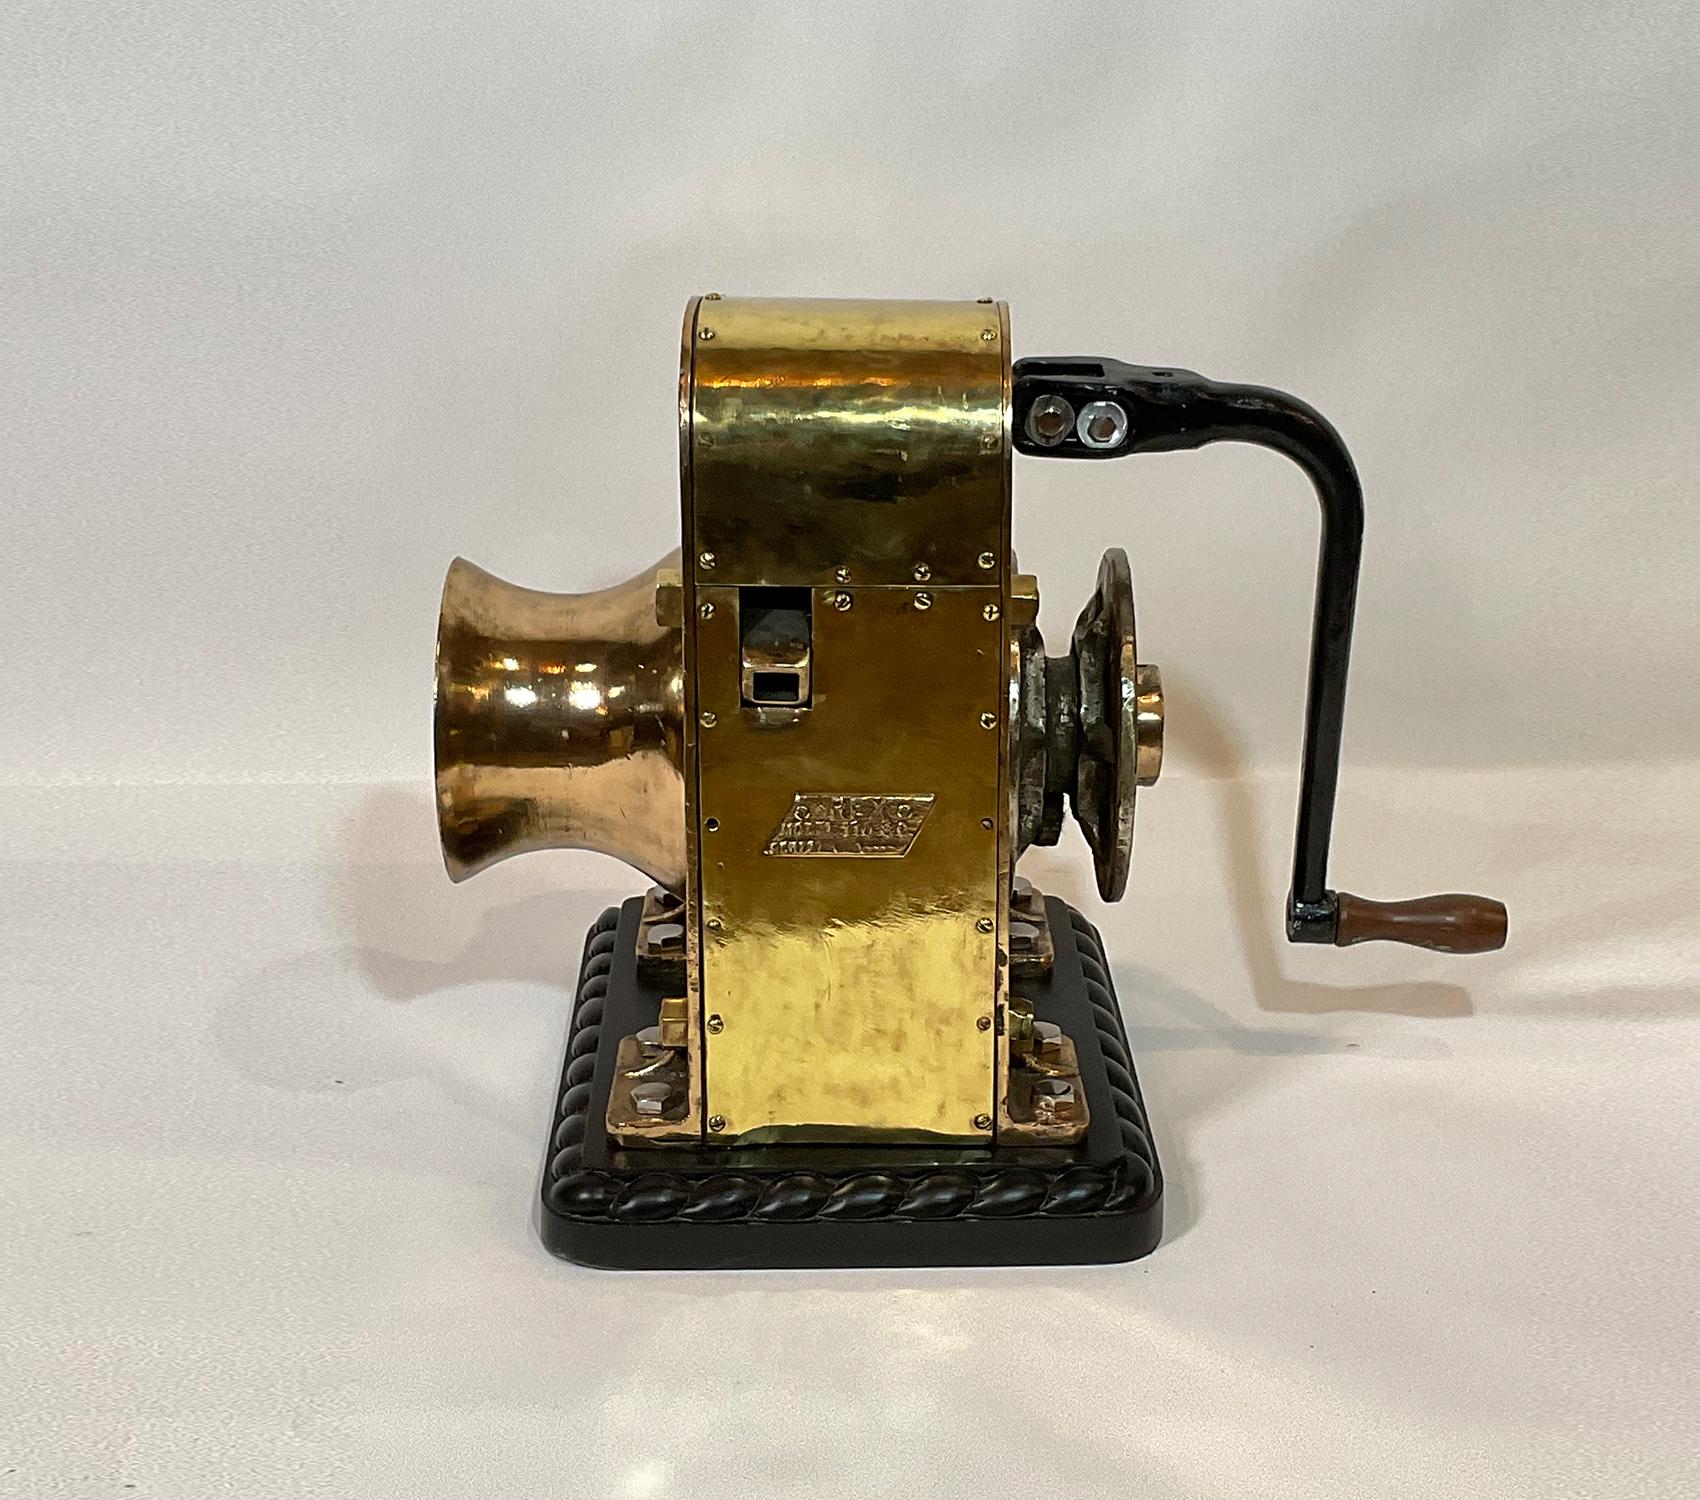 Ships winch by REX, model 110. This is extremely heavy, 220 pounds. The huge brass drum has a shaft that runs through the winch connecting to a chain sprocket. Also fitted with an iron handle with wood handle. Mounted by us to a wood base with rope